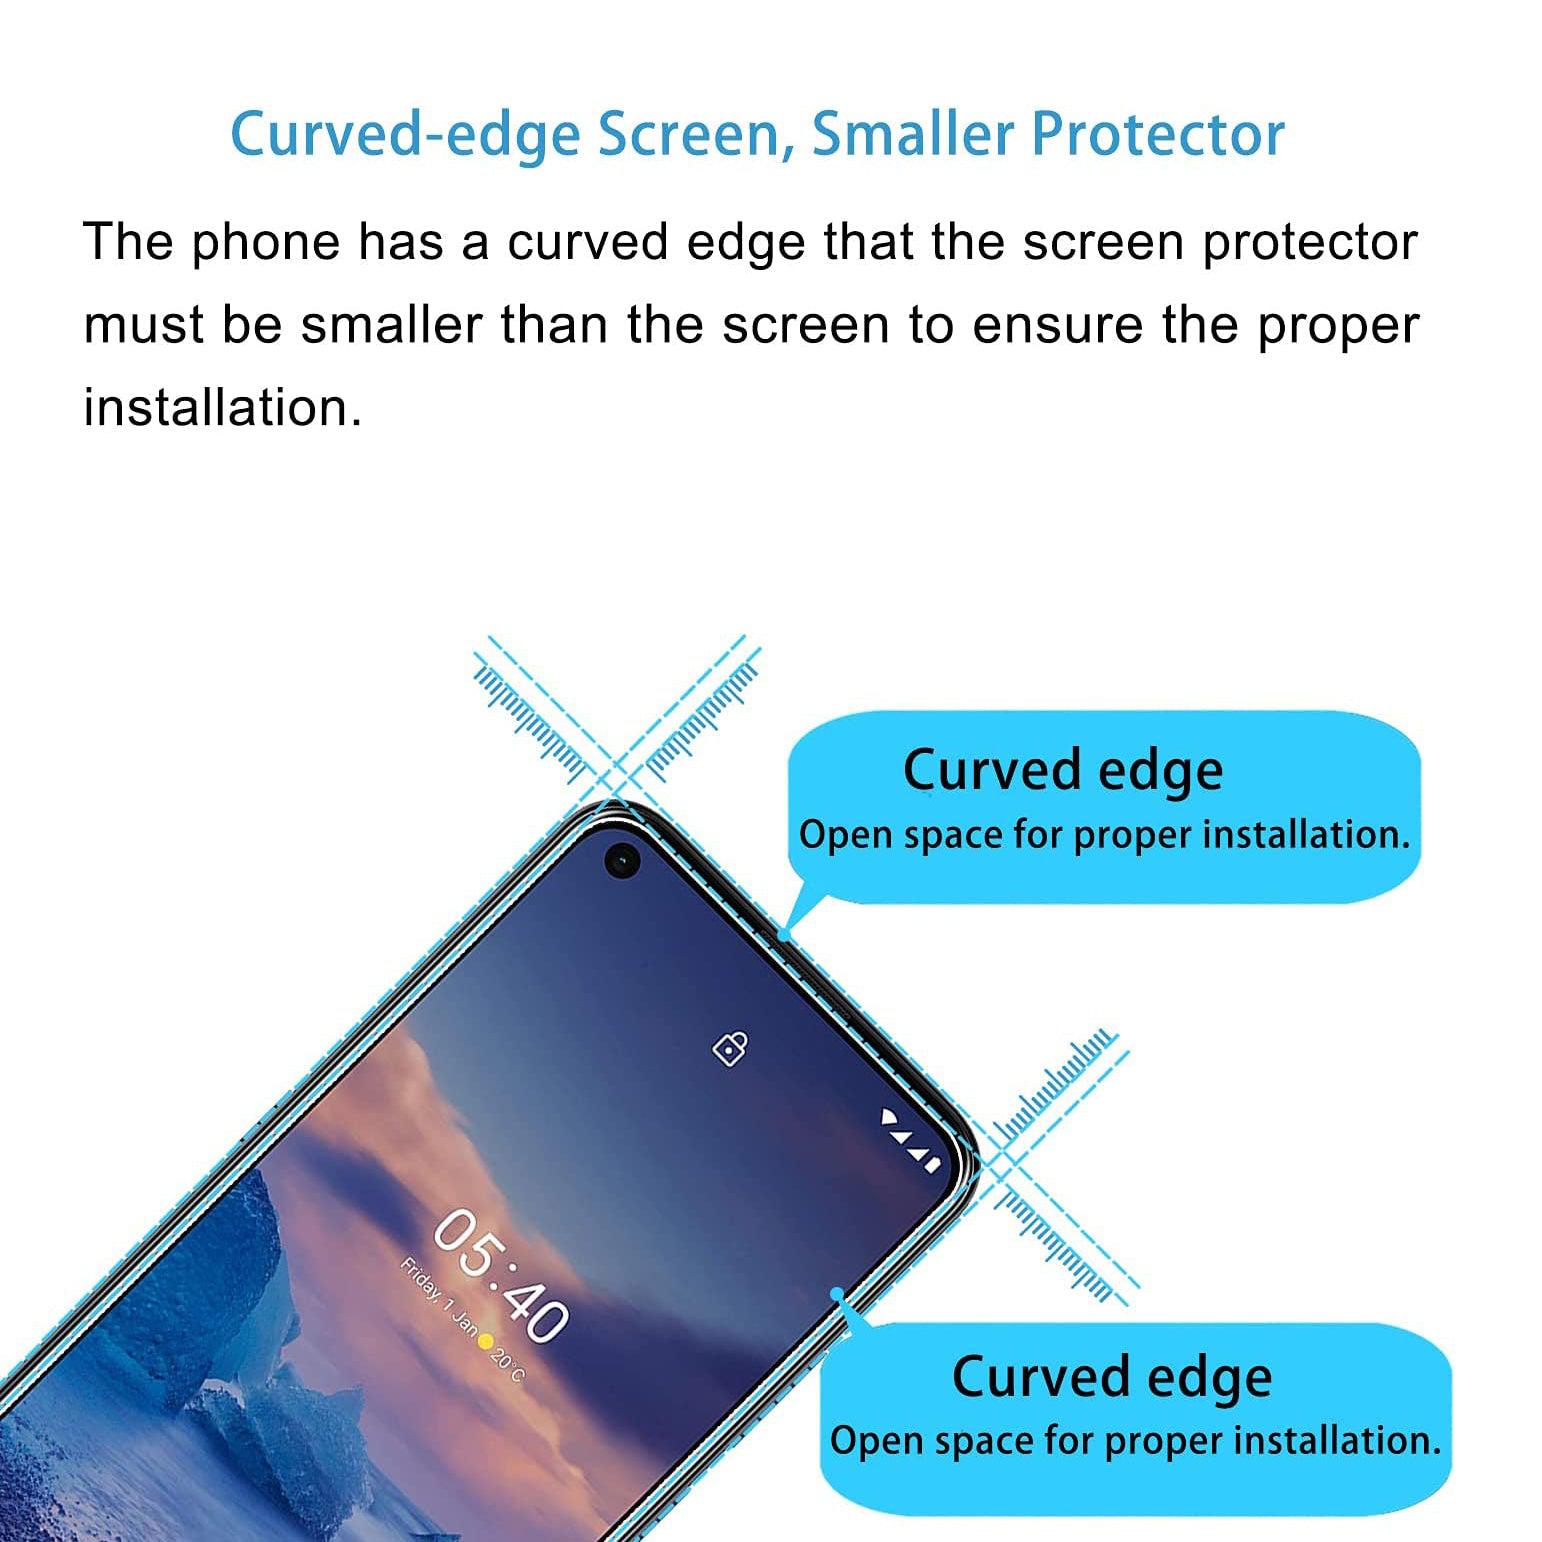 Screen Protector For Nokia 3.4 Tempered Glass-Tempered Glass-First Help Tech